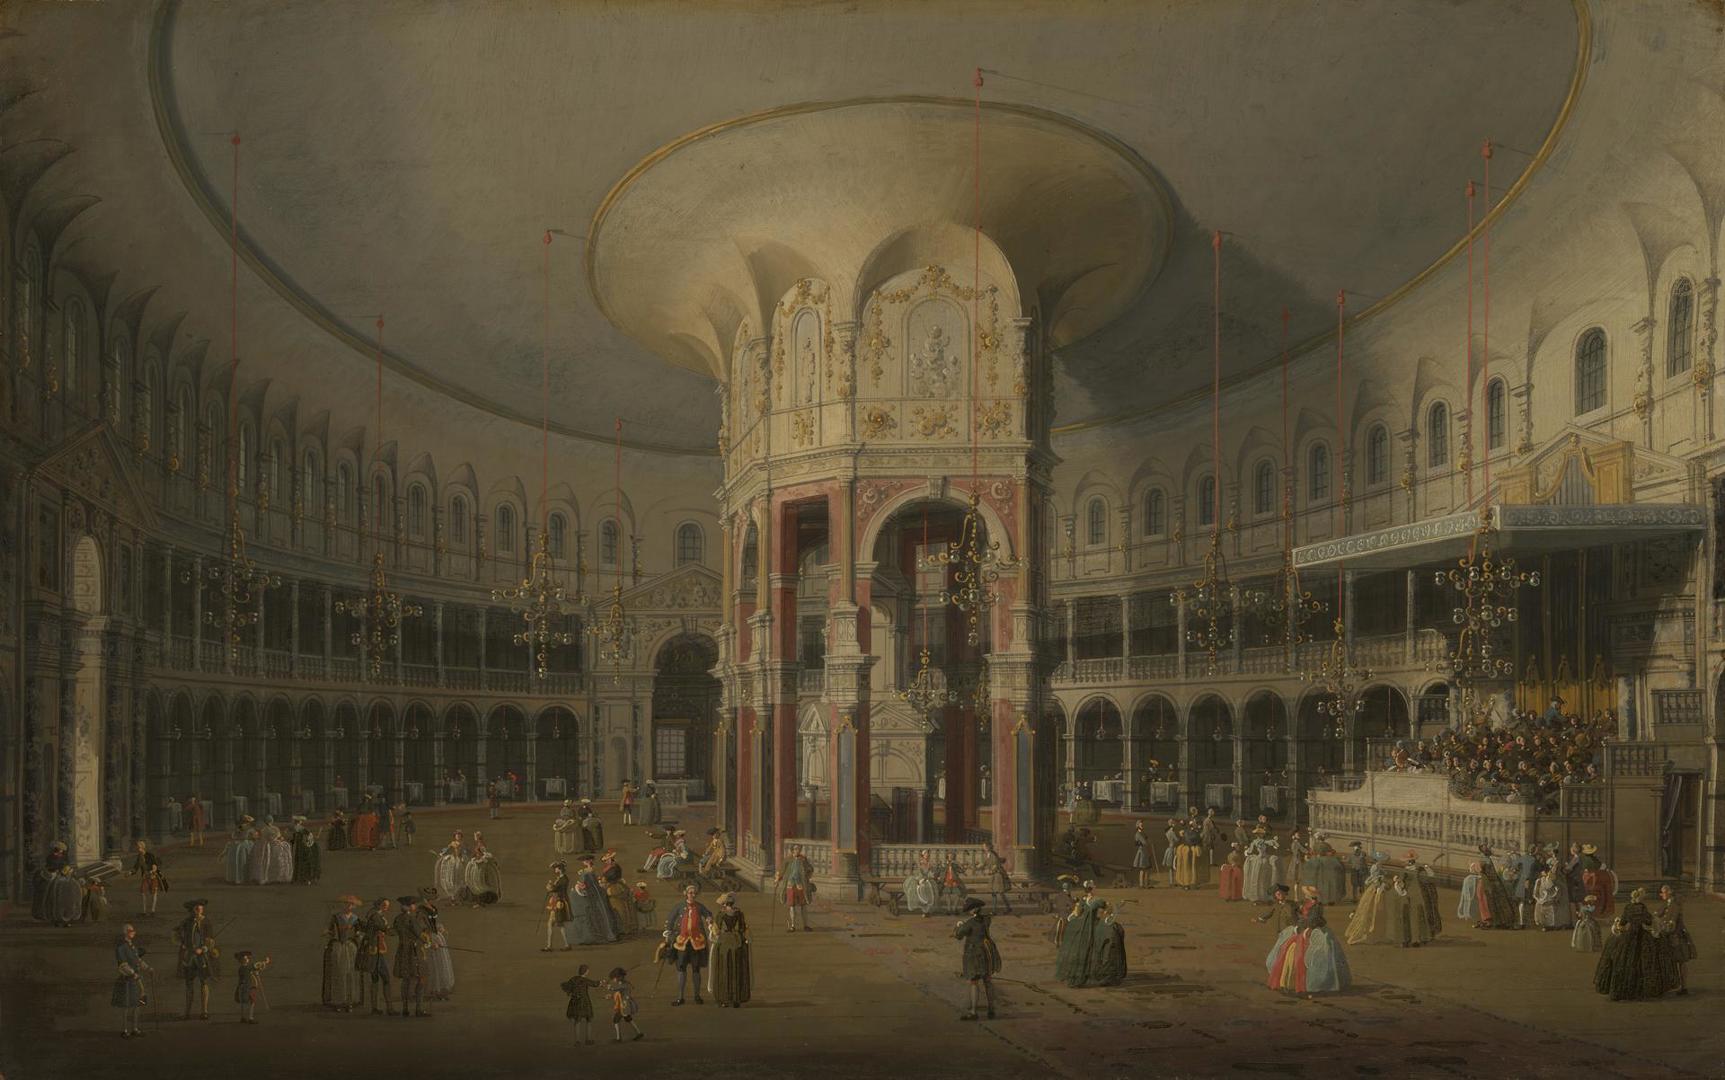 London: Interior of the Rotunda at Ranelagh by Canaletto